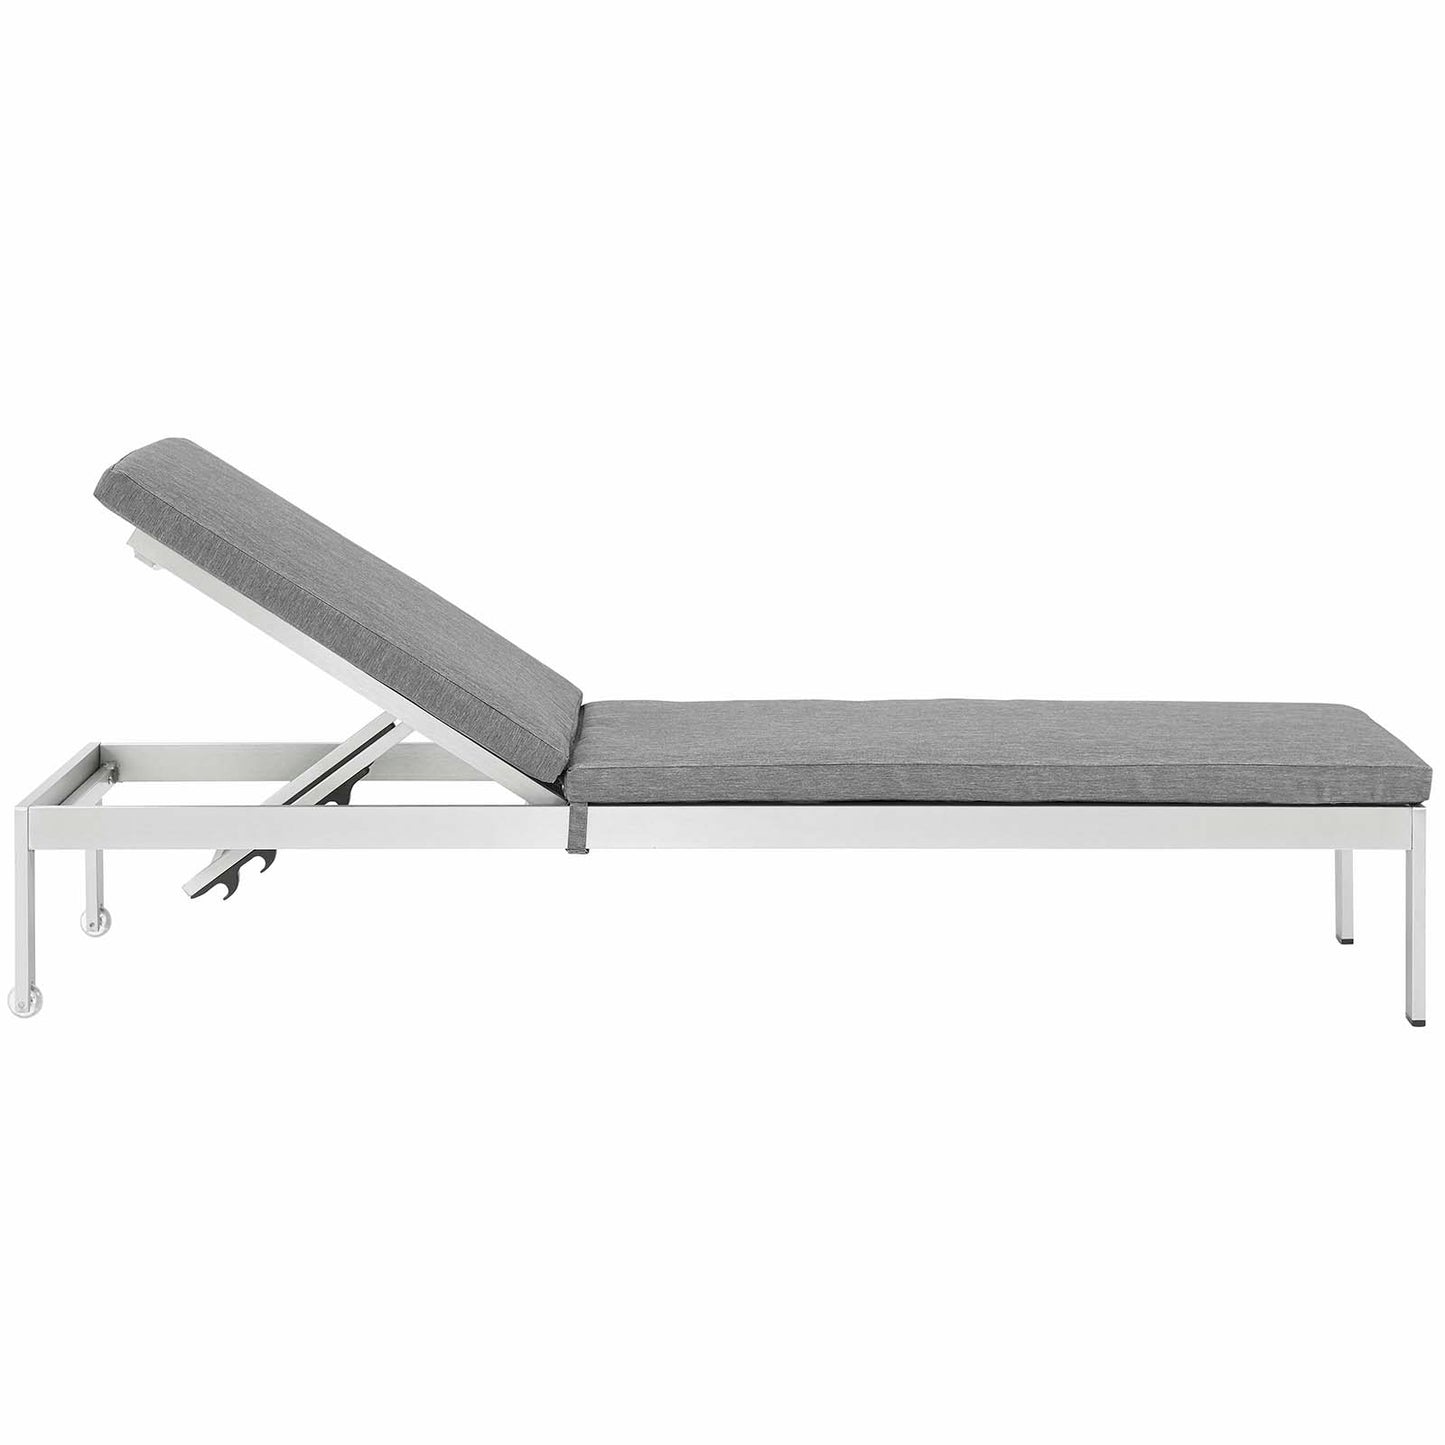 Shore Outdoor Patio Aluminum Chaise with Cushions